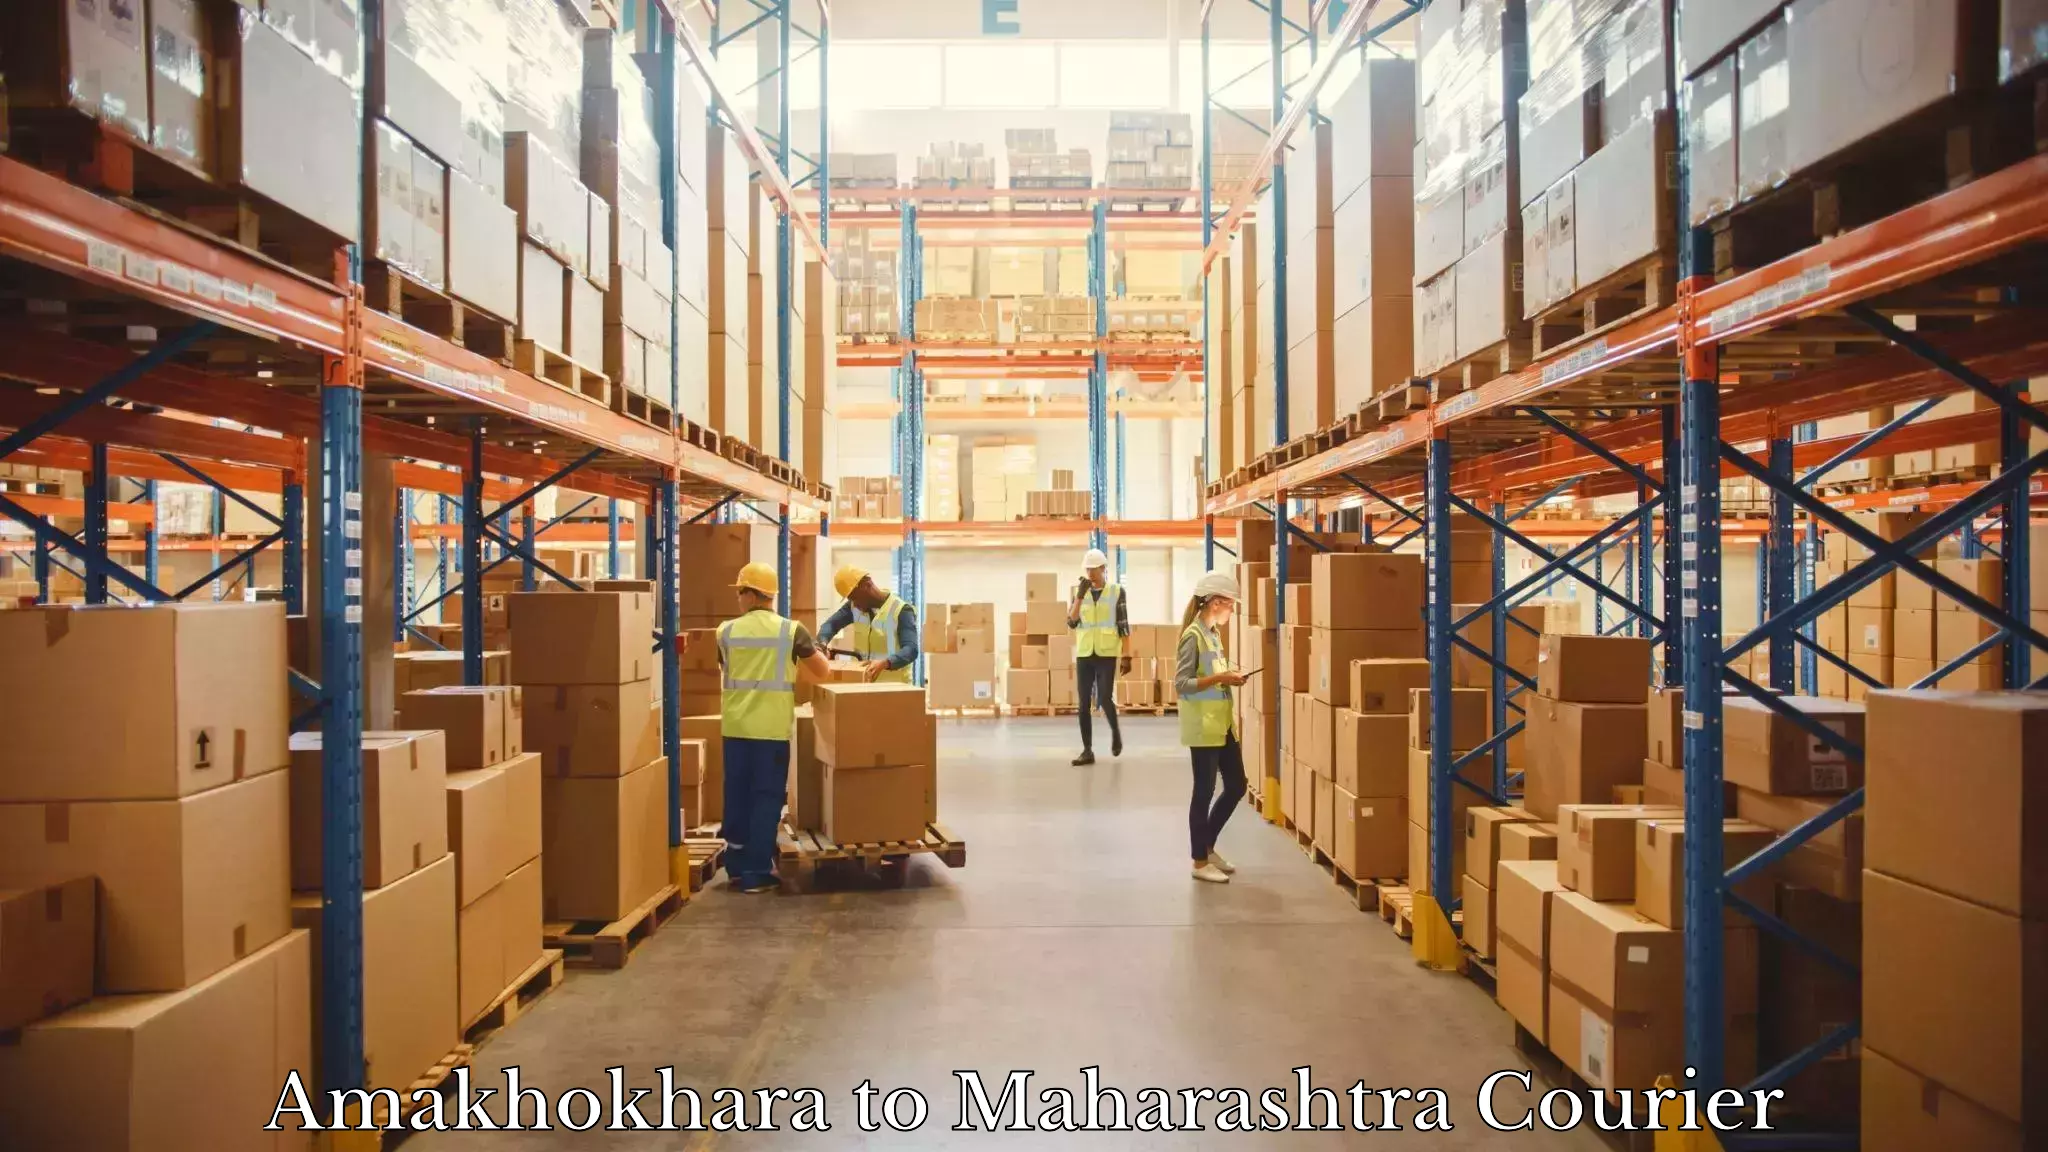 Express mail solutions Amakhokhara to Thane